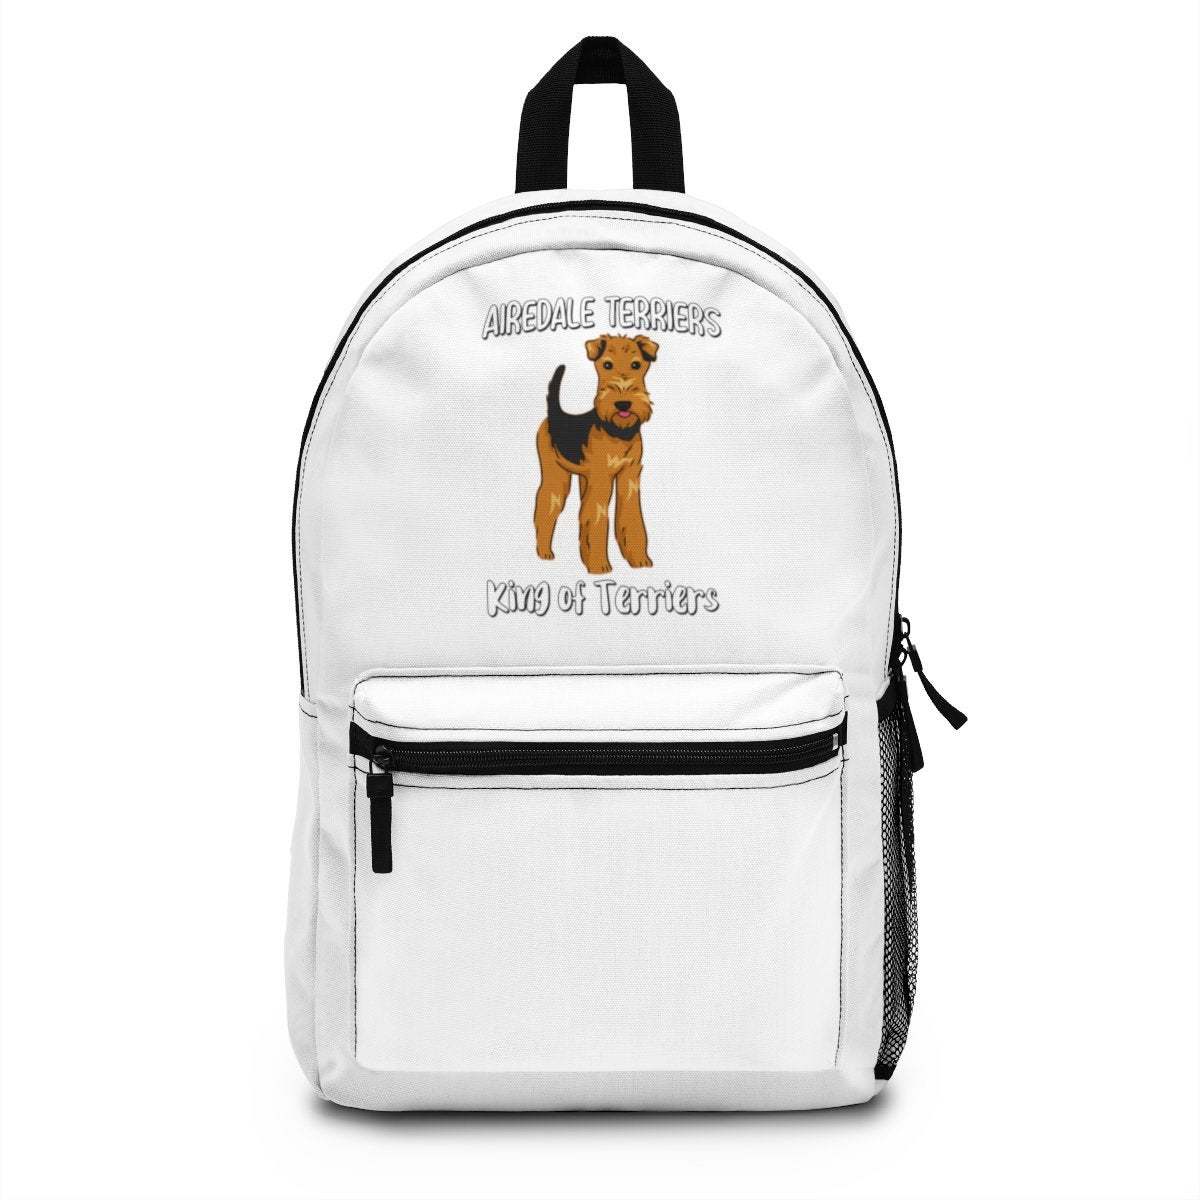 Airedale Terrier Backpack (Made in USA)